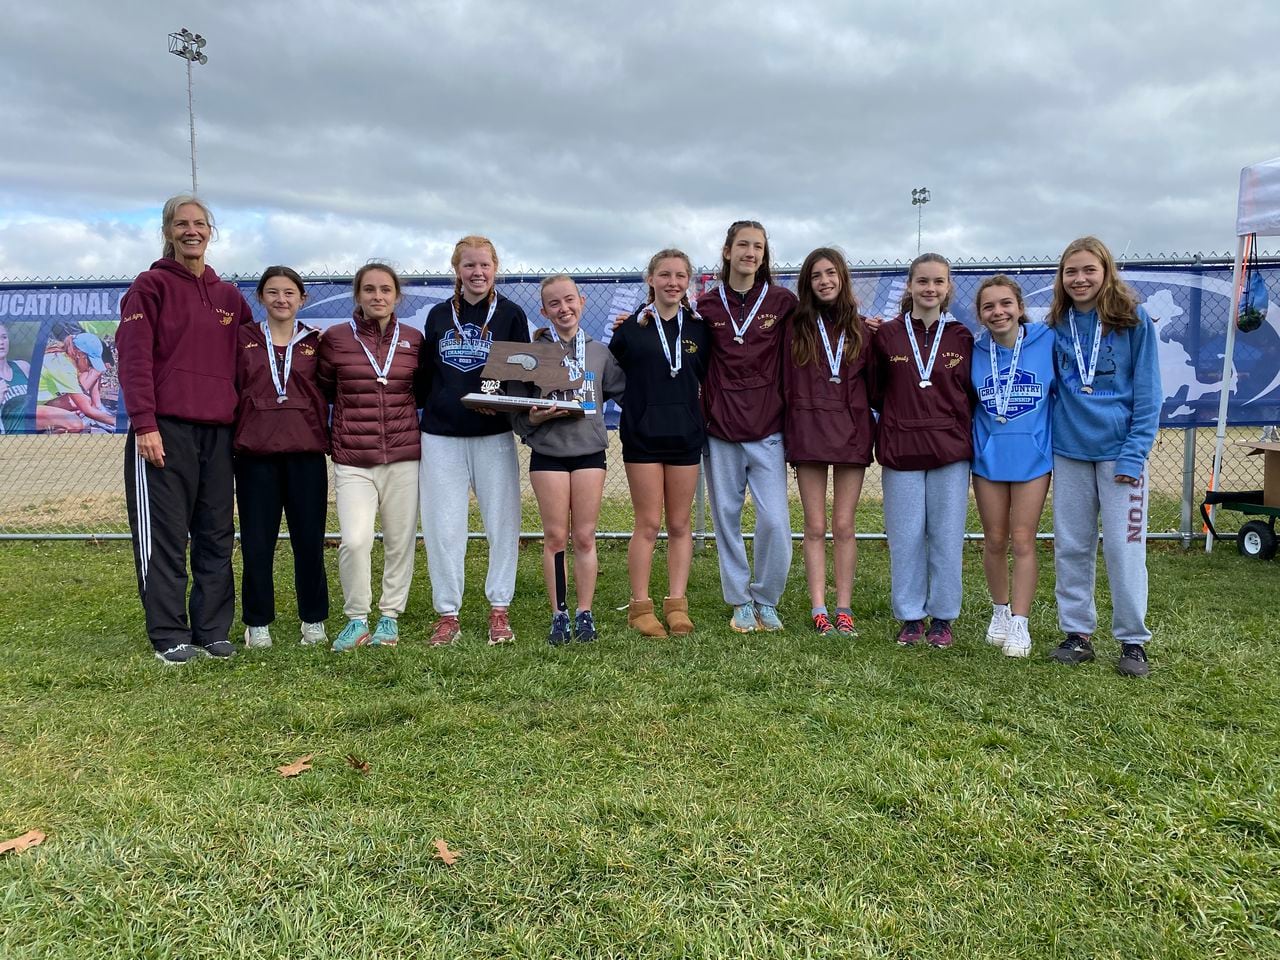 Lenox took the runner-up trophy at the Massachusetts state cross country championships on Saturday afternoon in Devens, Massachusetts.